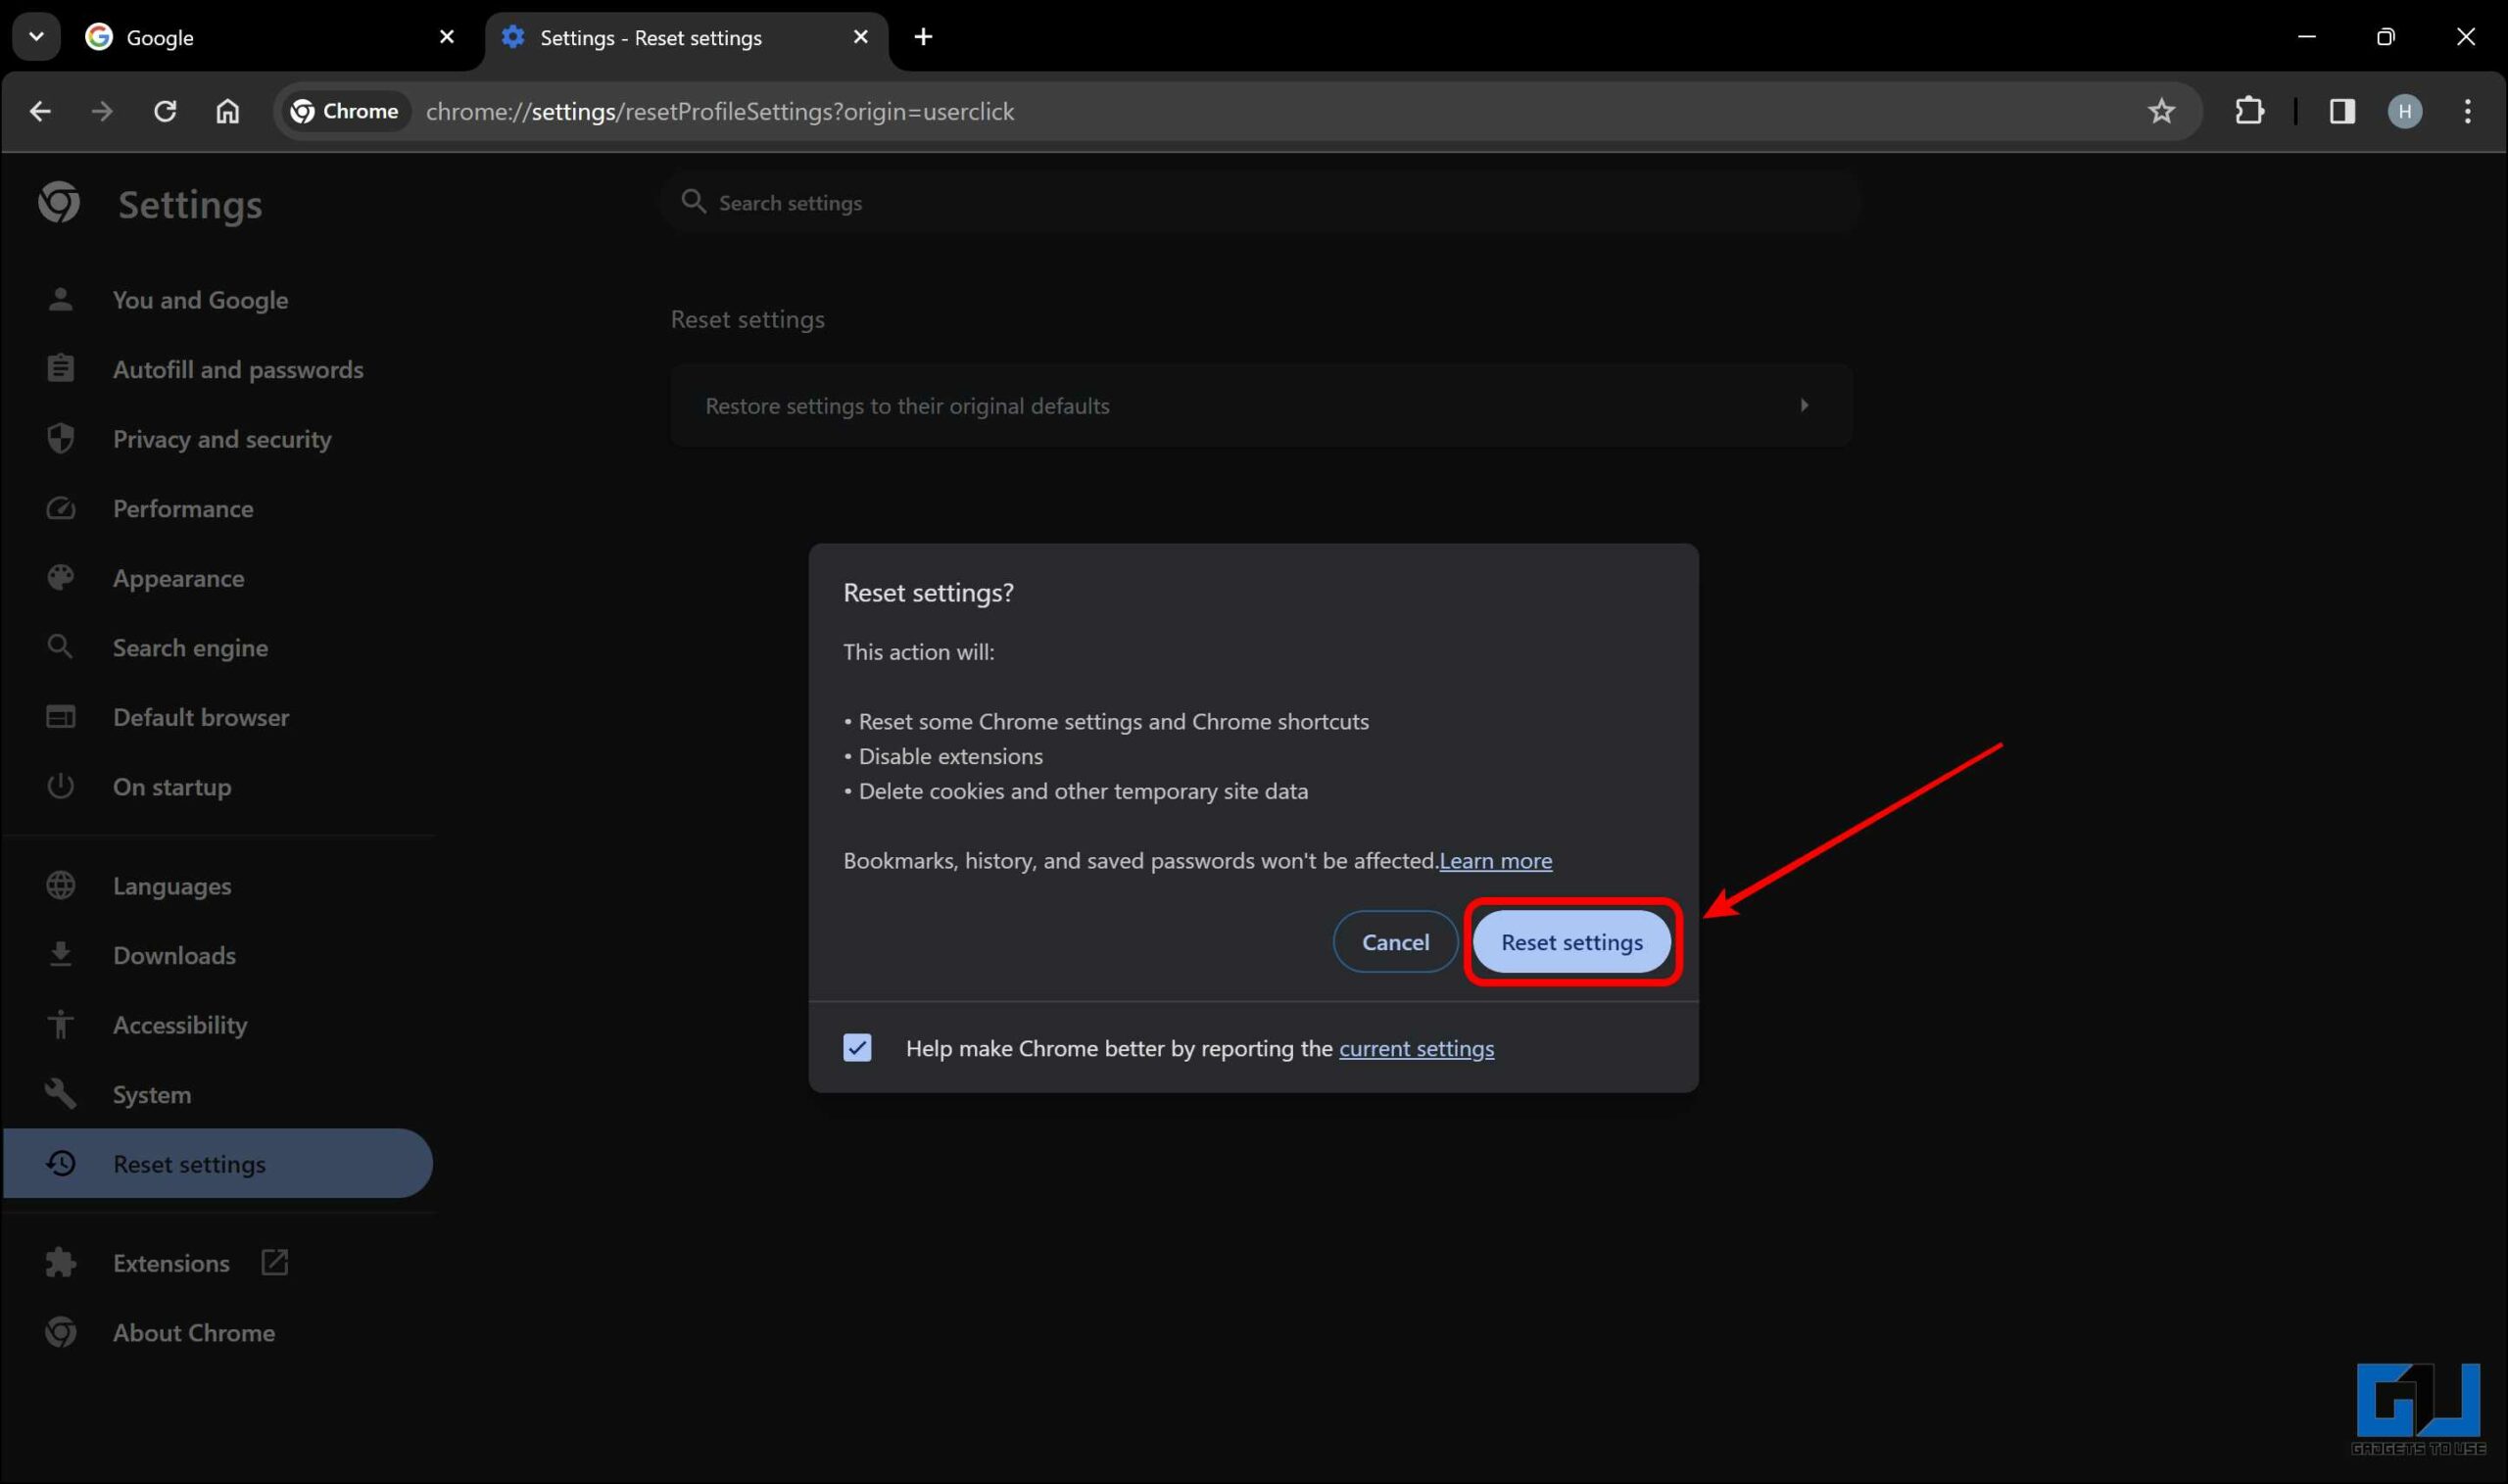 Resetting Google Chrome by clicking the Reset Settings button